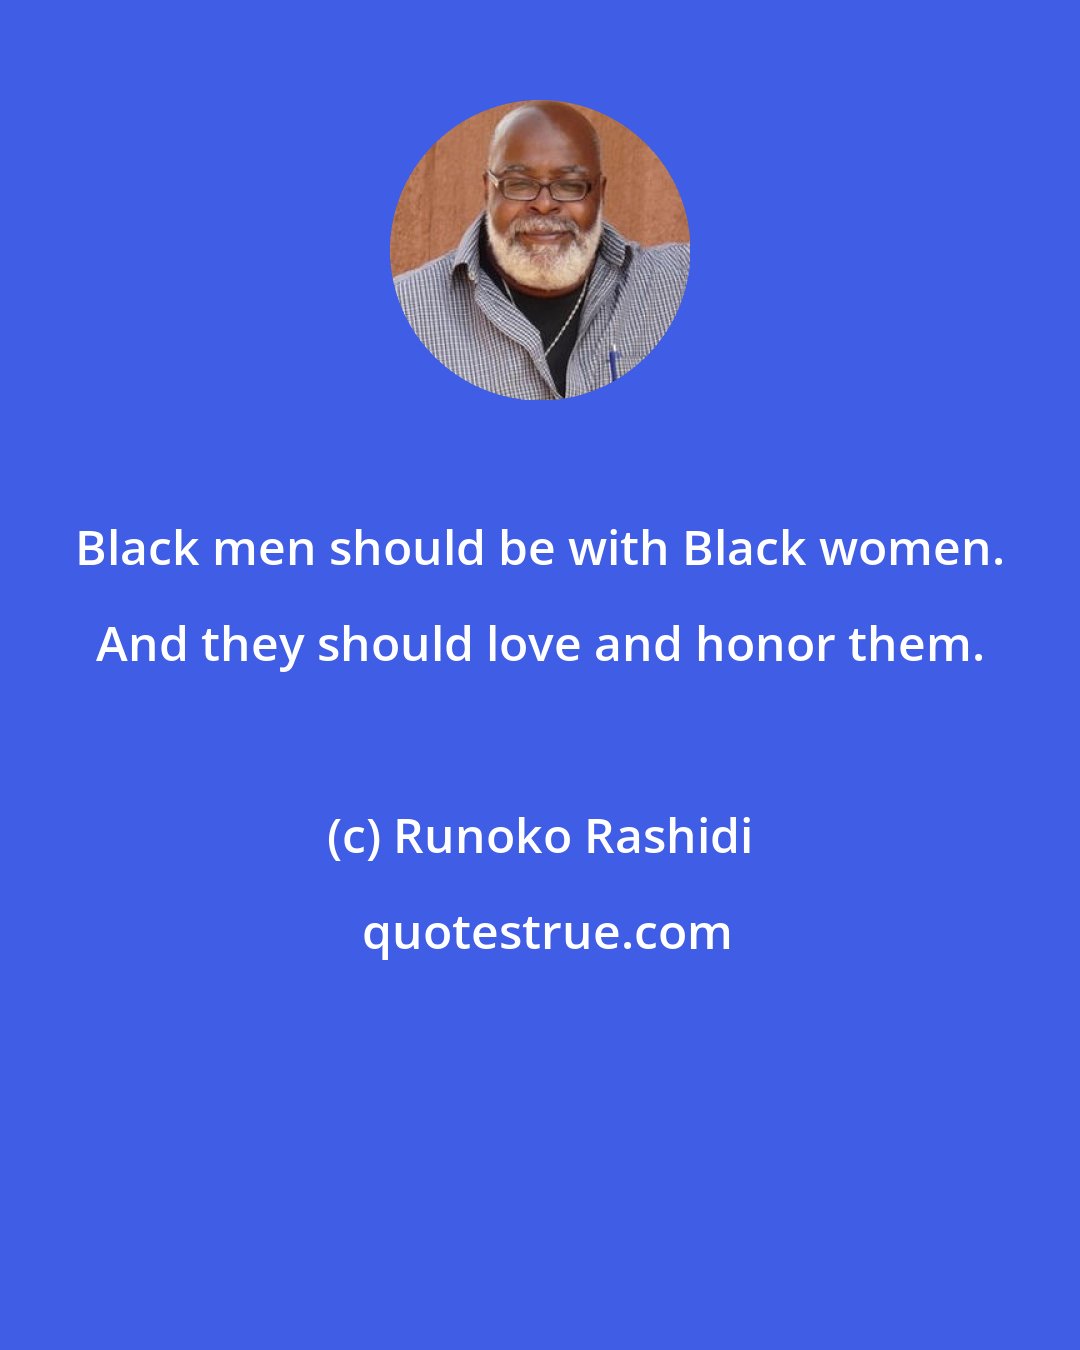 Runoko Rashidi: Black men should be with Black women. And they should love and honor them.